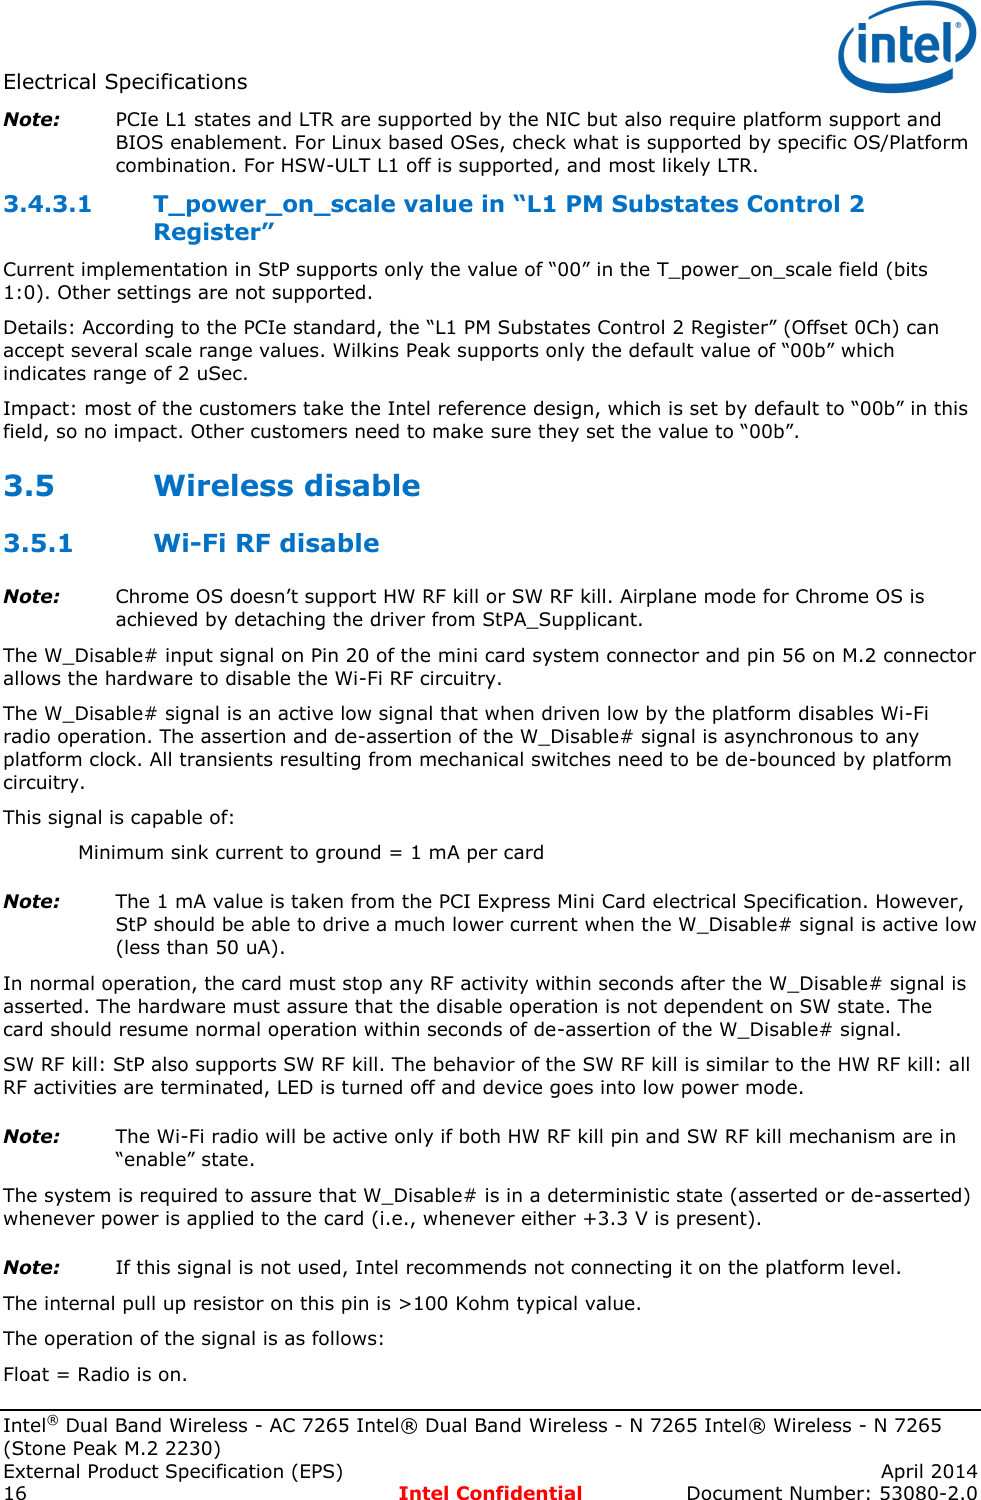 Electrical Specifications   Intel® Dual Band Wireless - AC 7265 Intel® Dual Band Wireless - N 7265 Intel® Wireless - N 7265 (Stone Peak M.2 2230) External Product Specification (EPS)    April 2014 16  Intel Confidential  Document Number: 53080-2.0 Note: PCIe L1 states and LTR are supported by the NIC but also require platform support and BIOS enablement. For Linux based OSes, check what is supported by specific OS/Platform combination. For HSW-ULT L1 off is supported, and most likely LTR.   T_power_on_scale value in “L1 PM Substates Control 2 3.4.3.1Register”  Current implementation in StP supports only the value of “00” in the T_power_on_scale field (bits 1:0). Other settings are not supported. Details: According to the PCIe standard, the “L1 PM Substates Control 2 Register” (Offset 0Ch) can accept several scale range values. Wilkins Peak supports only the default value of “00b” which indicates range of 2 uSec. Impact: most of the customers take the Intel reference design, which is set by default to “00b” in this field, so no impact. Other customers need to make sure they set the value to “00b”. 3.5 Wireless disable 3.5.1 Wi-Fi RF disable Note: Chrome OS doesn’t support HW RF kill or SW RF kill. Airplane mode for Chrome OS is achieved by detaching the driver from StPA_Supplicant.  The W_Disable# input signal on Pin 20 of the mini card system connector and pin 56 on M.2 connector allows the hardware to disable the Wi-Fi RF circuitry. The W_Disable# signal is an active low signal that when driven low by the platform disables Wi-Fi radio operation. The assertion and de-assertion of the W_Disable# signal is asynchronous to any platform clock. All transients resulting from mechanical switches need to be de-bounced by platform circuitry.  This signal is capable of:    Minimum sink current to ground = 1 mA per card Note: The 1 mA value is taken from the PCI Express Mini Card electrical Specification. However, StP should be able to drive a much lower current when the W_Disable# signal is active low (less than 50 uA). In normal operation, the card must stop any RF activity within seconds after the W_Disable# signal is asserted. The hardware must assure that the disable operation is not dependent on SW state. The card should resume normal operation within seconds of de-assertion of the W_Disable# signal.  SW RF kill: StP also supports SW RF kill. The behavior of the SW RF kill is similar to the HW RF kill: all RF activities are terminated, LED is turned off and device goes into low power mode. Note: The Wi-Fi radio will be active only if both HW RF kill pin and SW RF kill mechanism are in “enable” state. The system is required to assure that W_Disable# is in a deterministic state (asserted or de-asserted) whenever power is applied to the card (i.e., whenever either +3.3 V is present). Note: If this signal is not used, Intel recommends not connecting it on the platform level. The internal pull up resistor on this pin is &gt;100 Kohm typical value.  The operation of the signal is as follows: Float = Radio is on. 